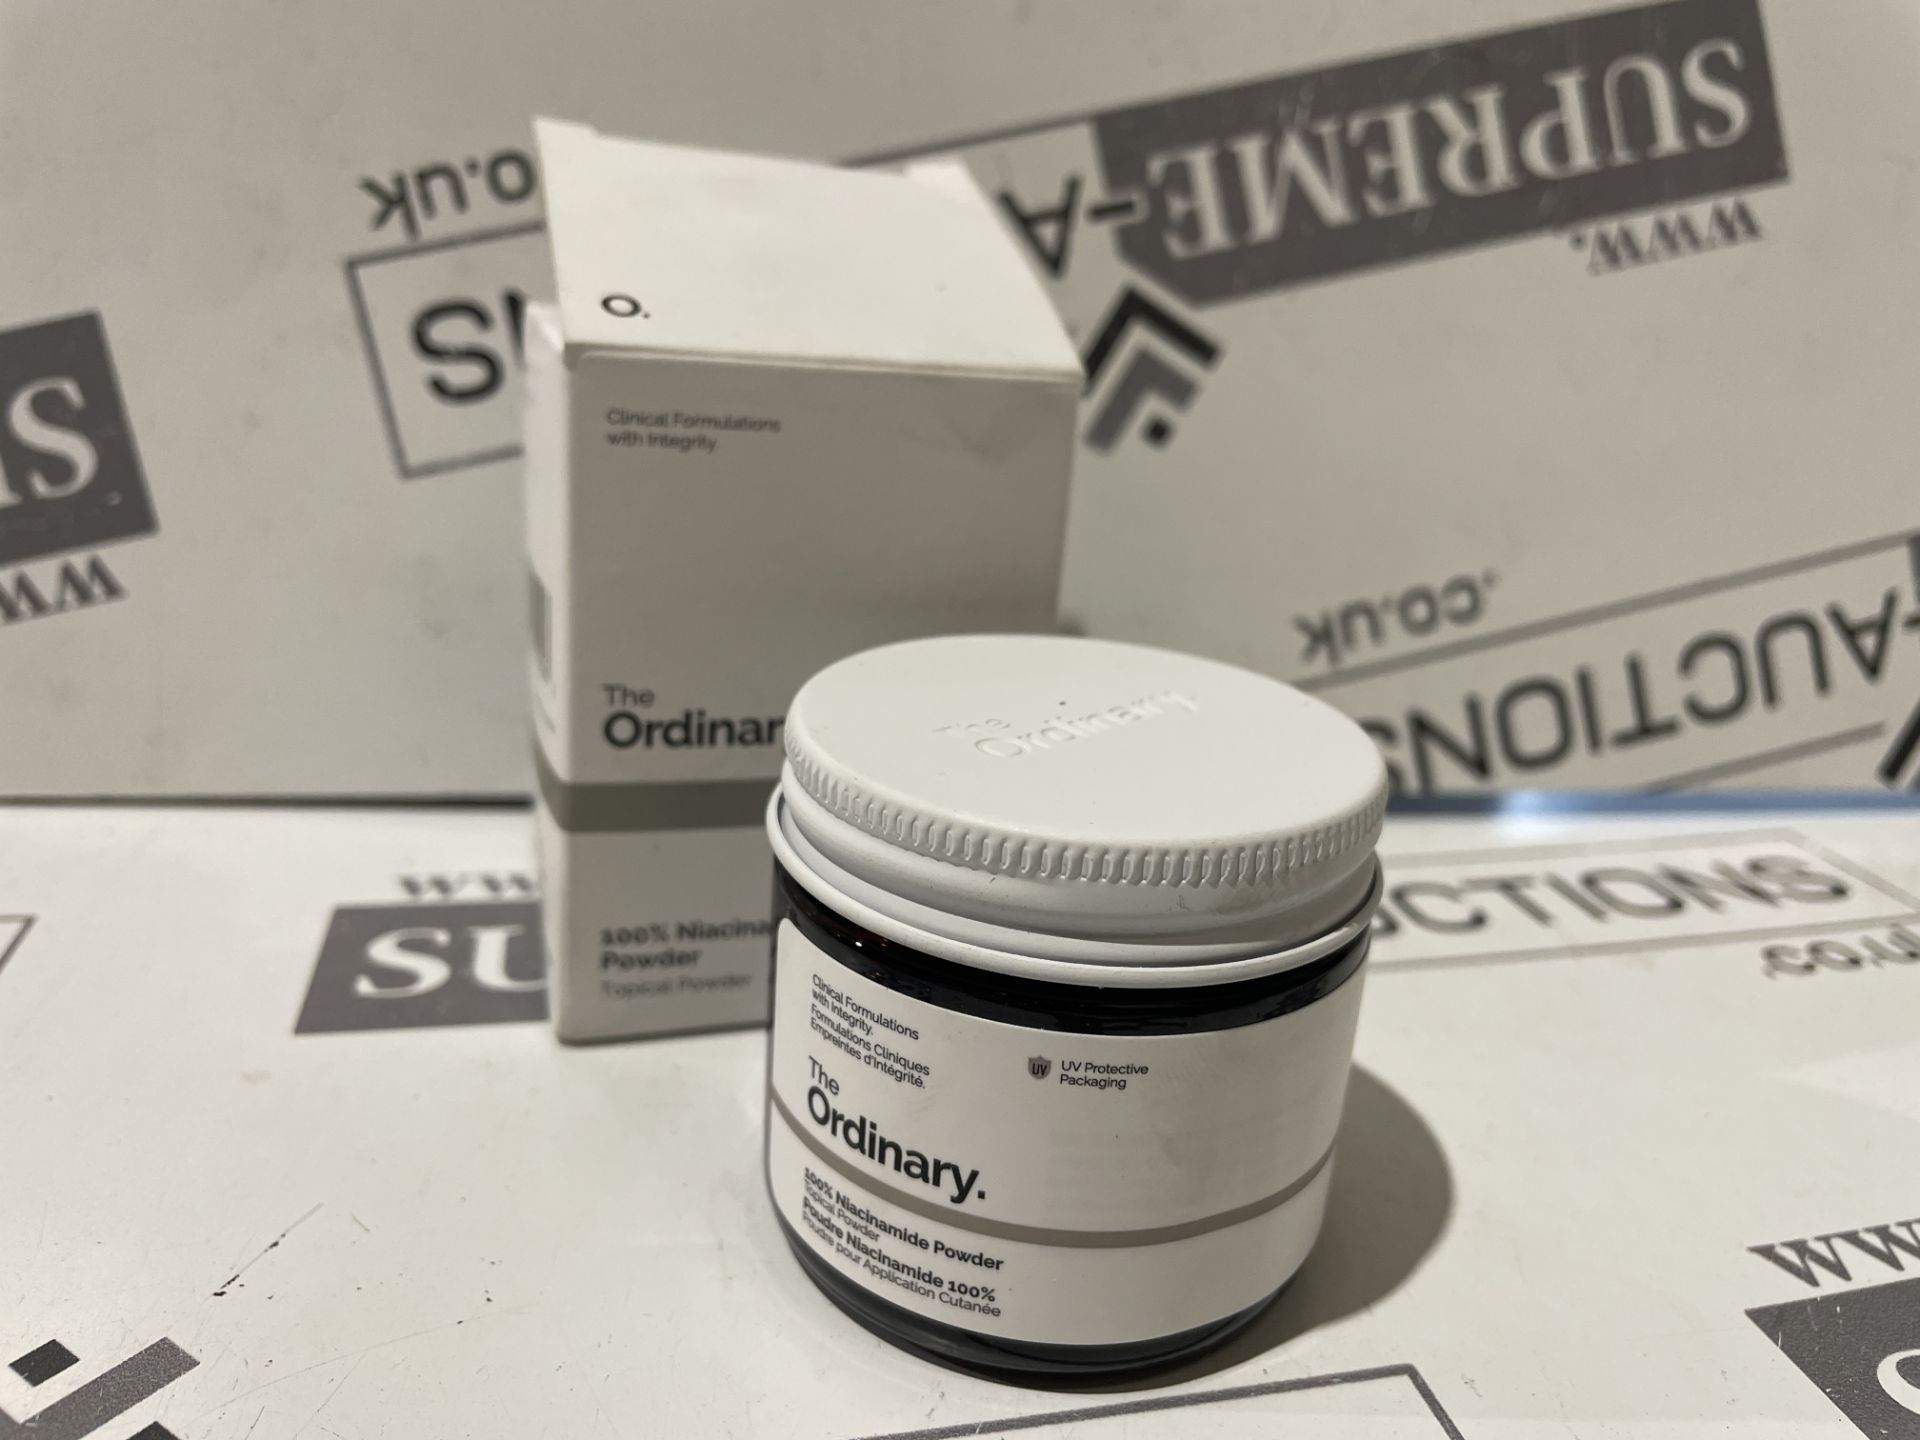 180 X THE ORDINARY 20G TROPICAL POWDER (PLEASE NOTE PAST EXPIRY) R3-8